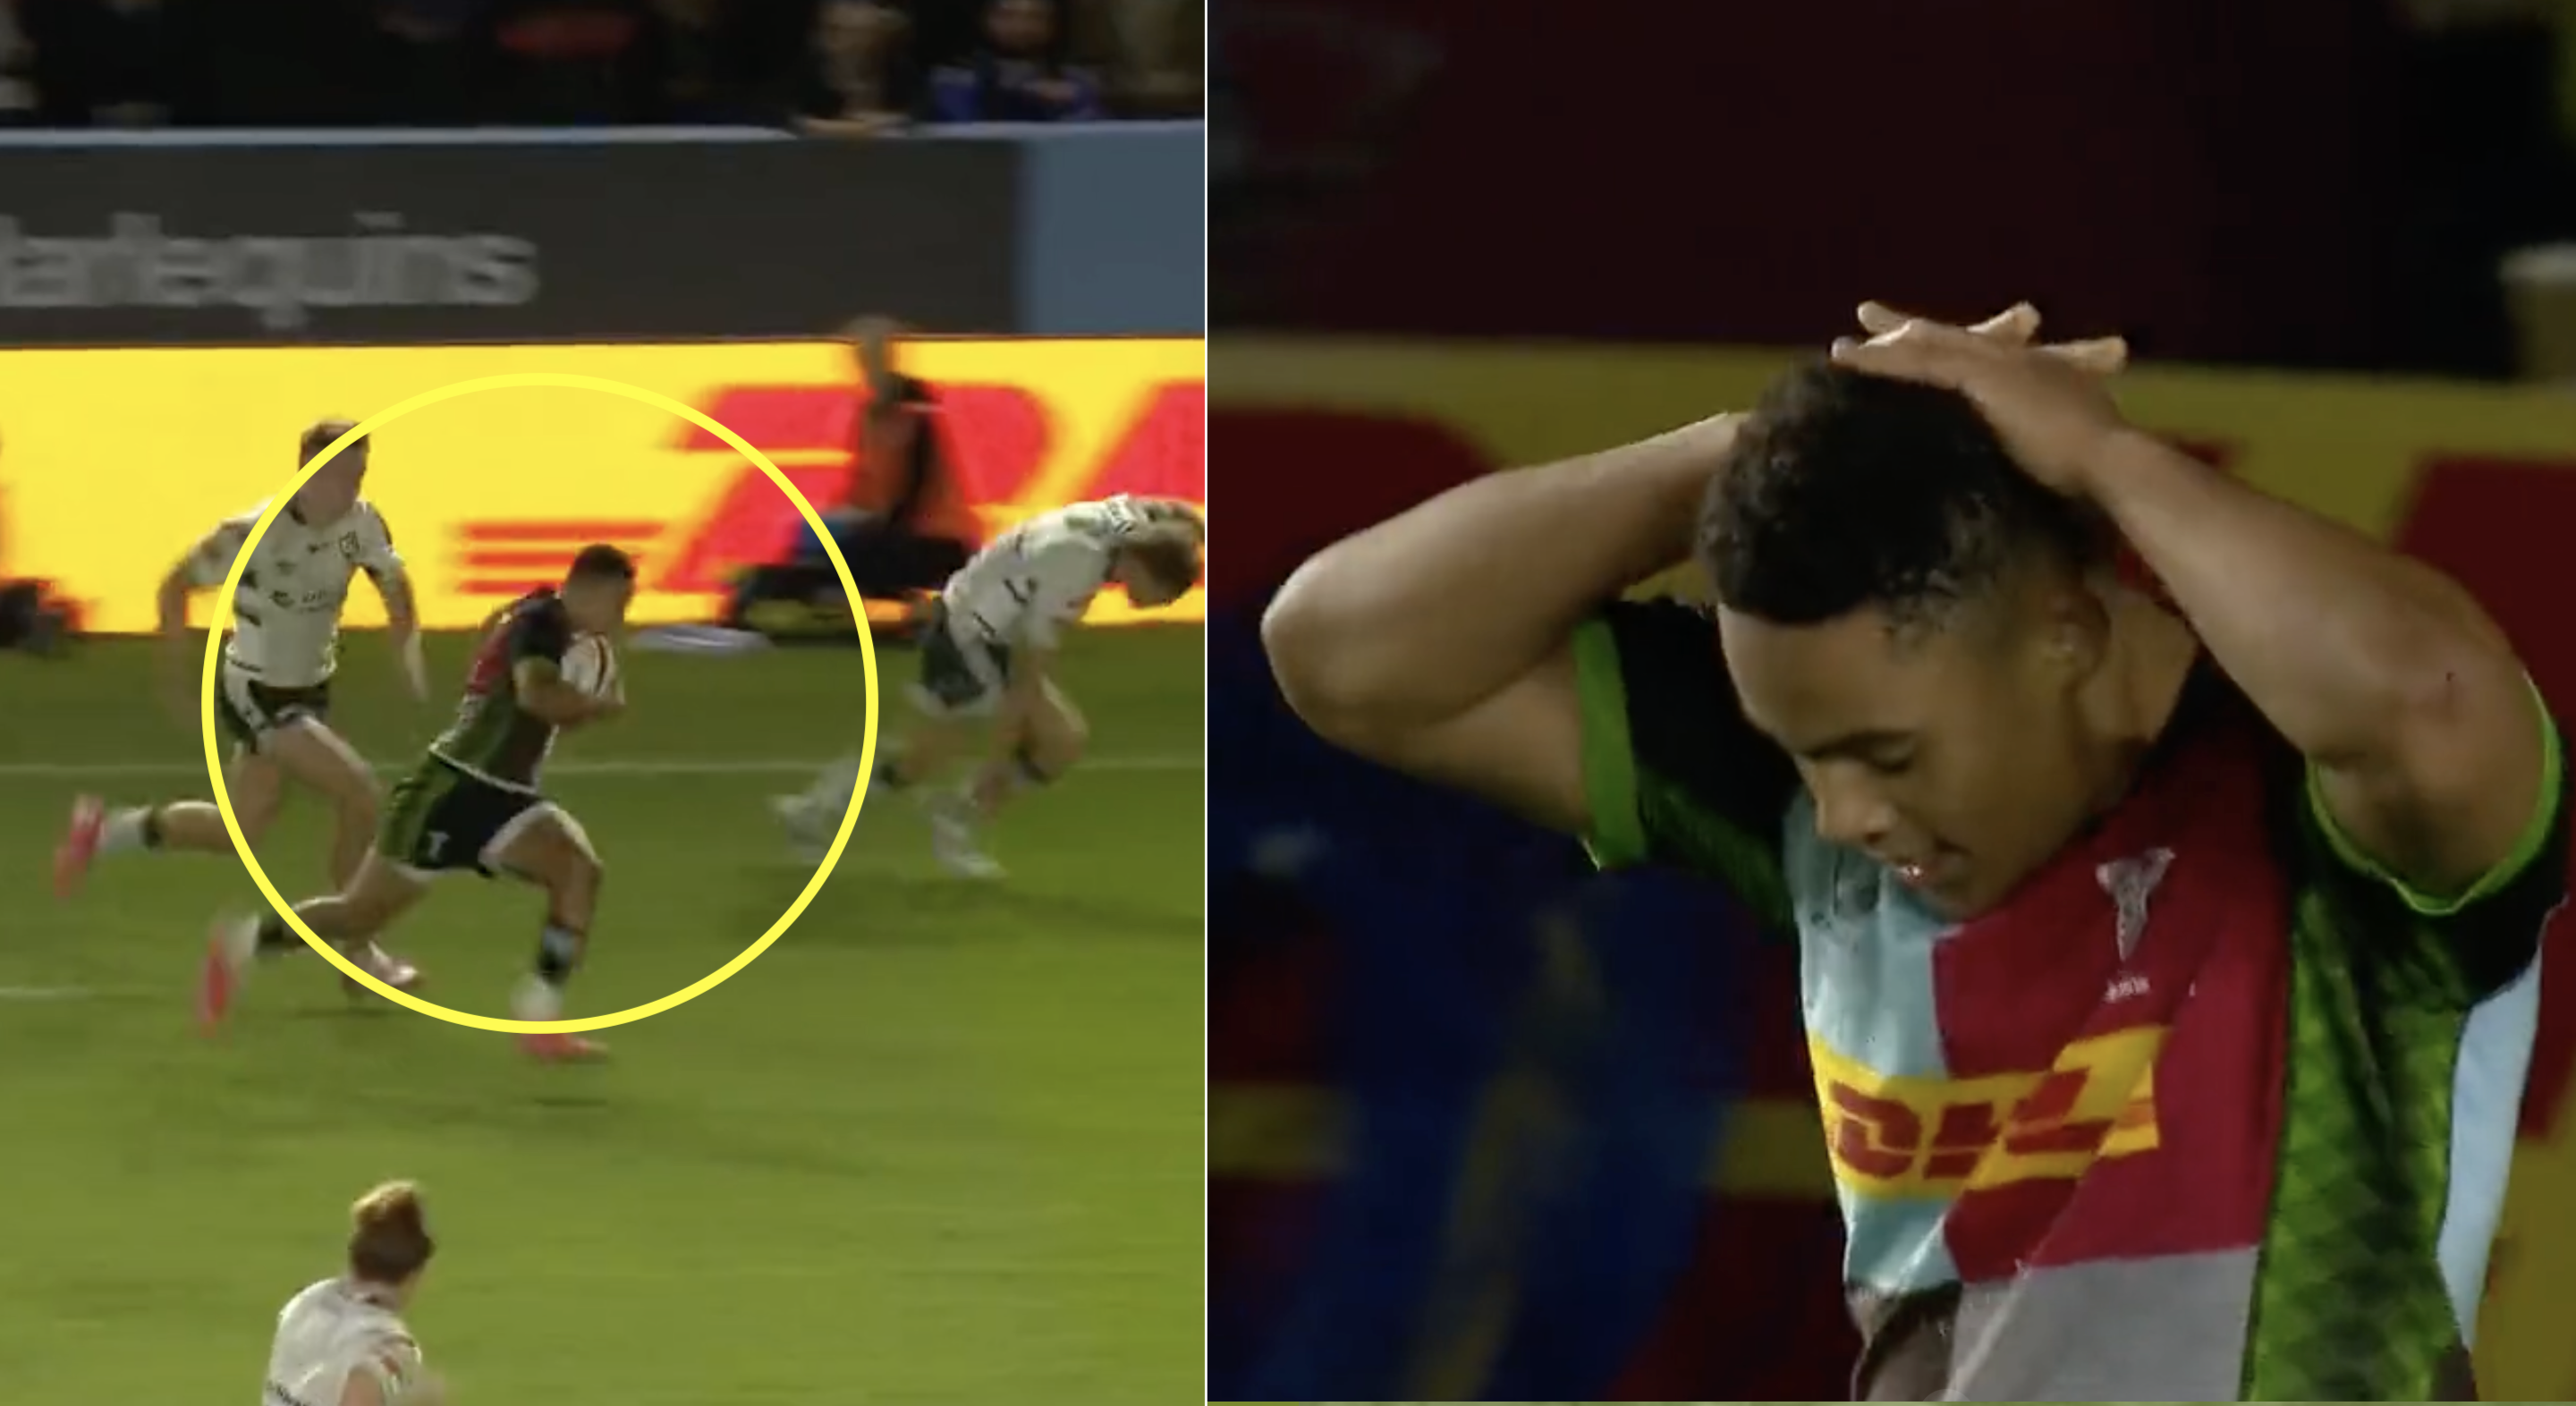 Harlequins teenager stuns social media with pace and footwork